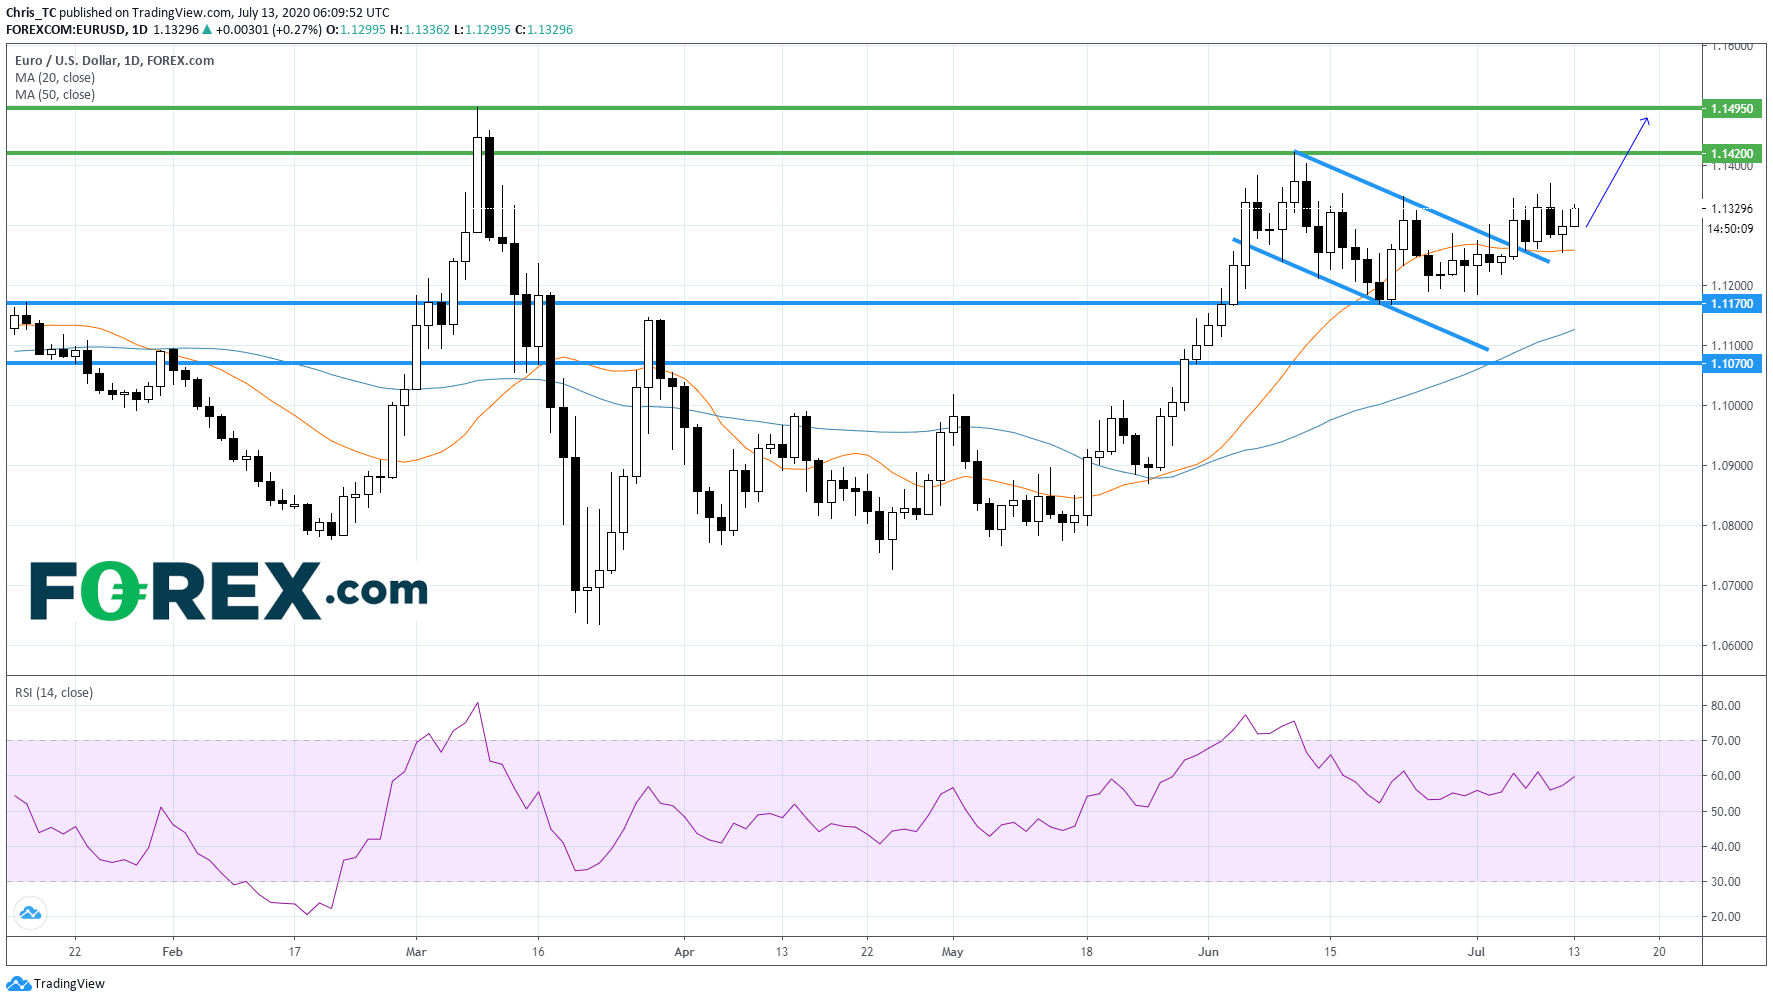 TradingView chart of Euro vs USD. Analysed in July 2020